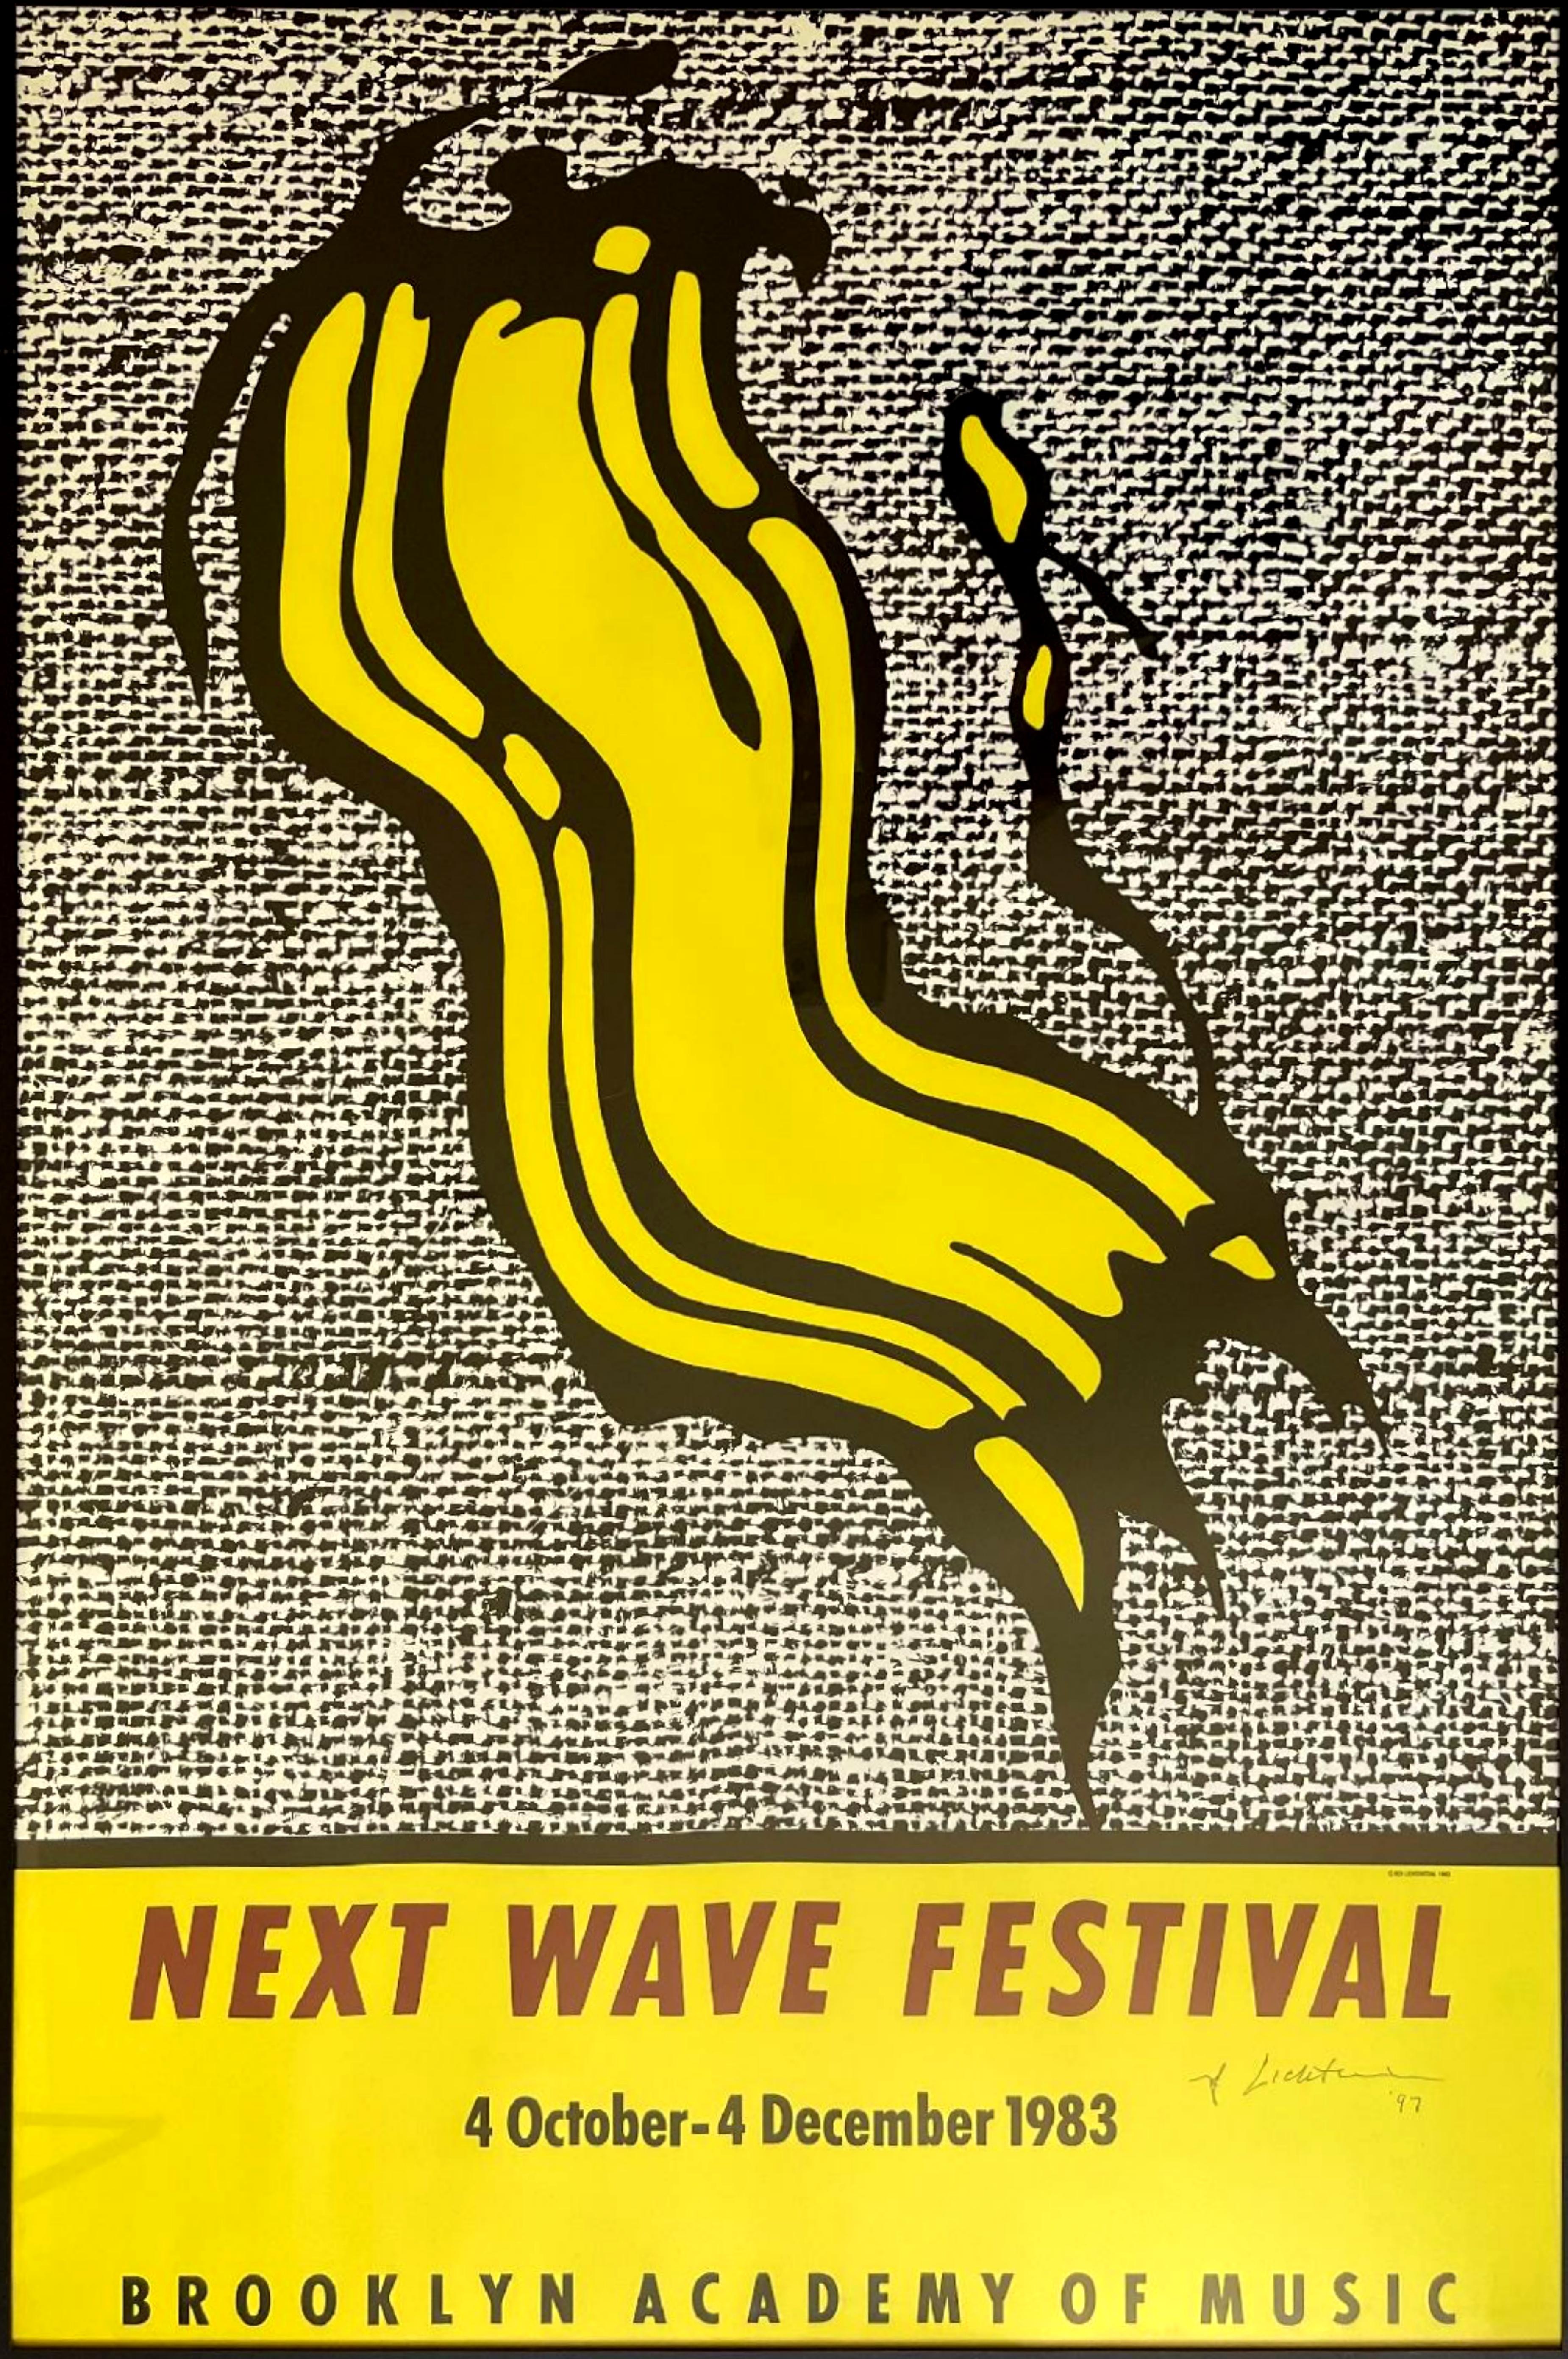 Next Wave Festival poster at BAM (Hand signed and dated '97 by Roy Lichtenstein)